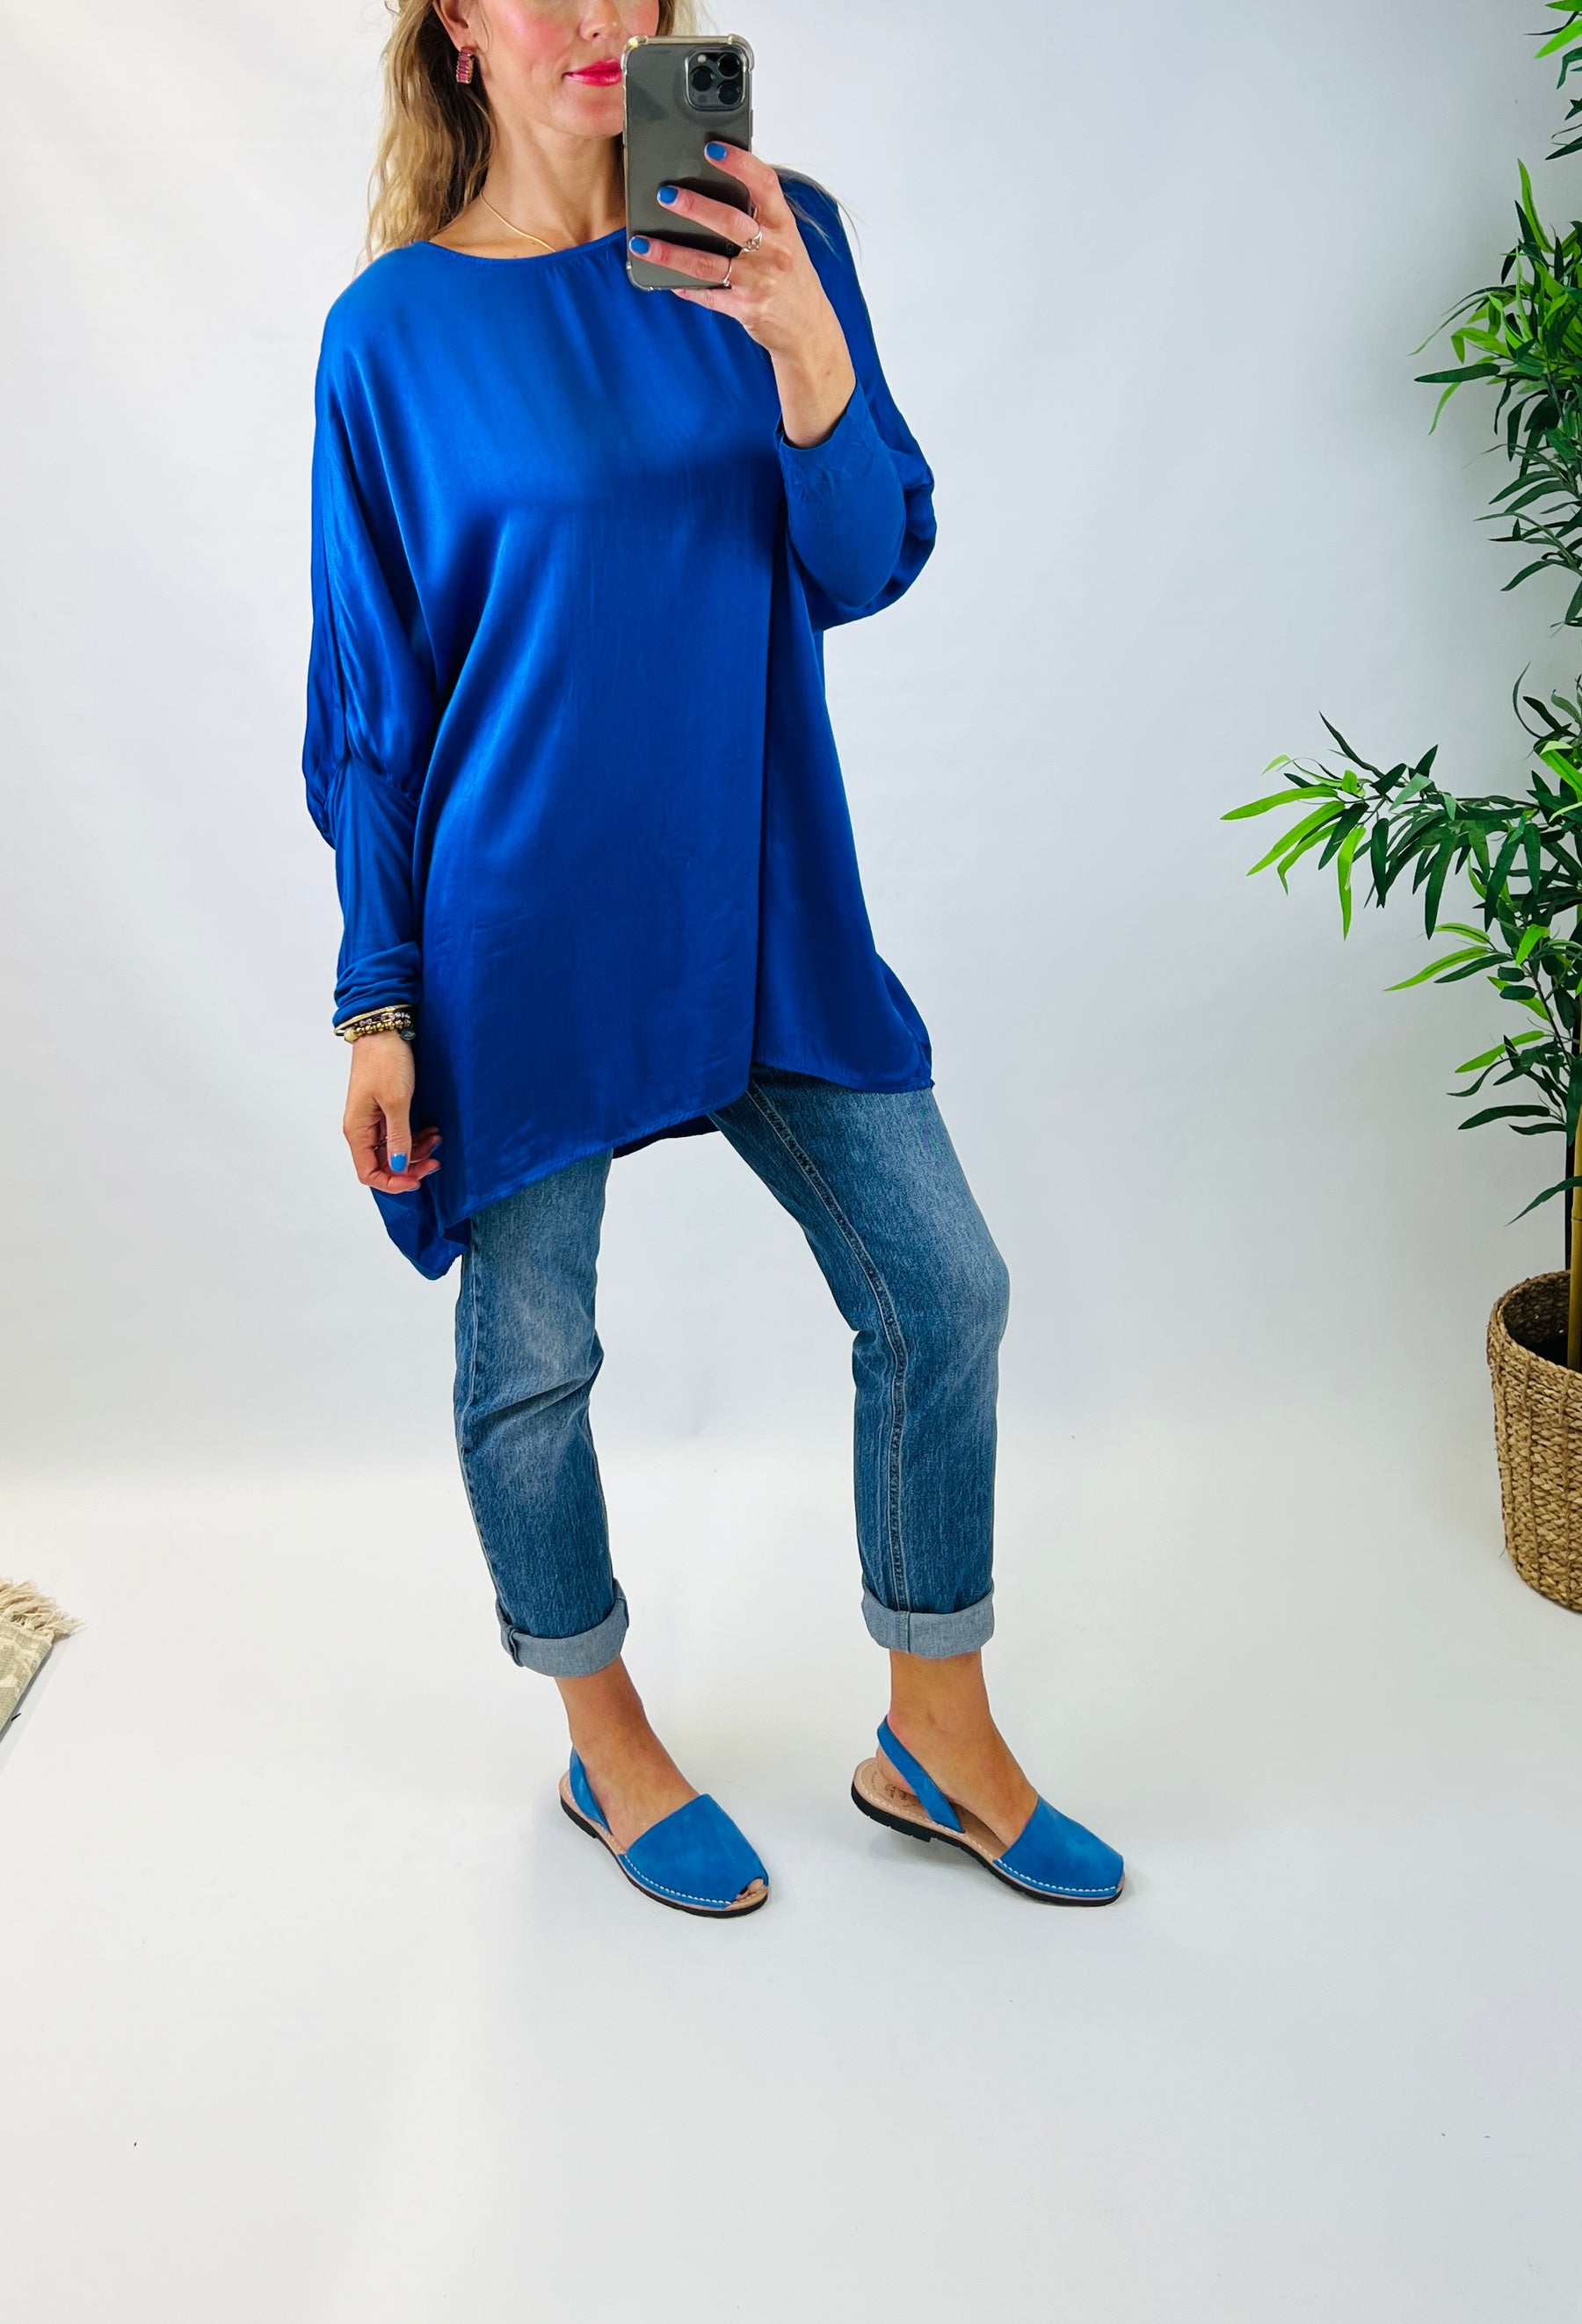 Eivissa Relaxed Fit Top in Blue